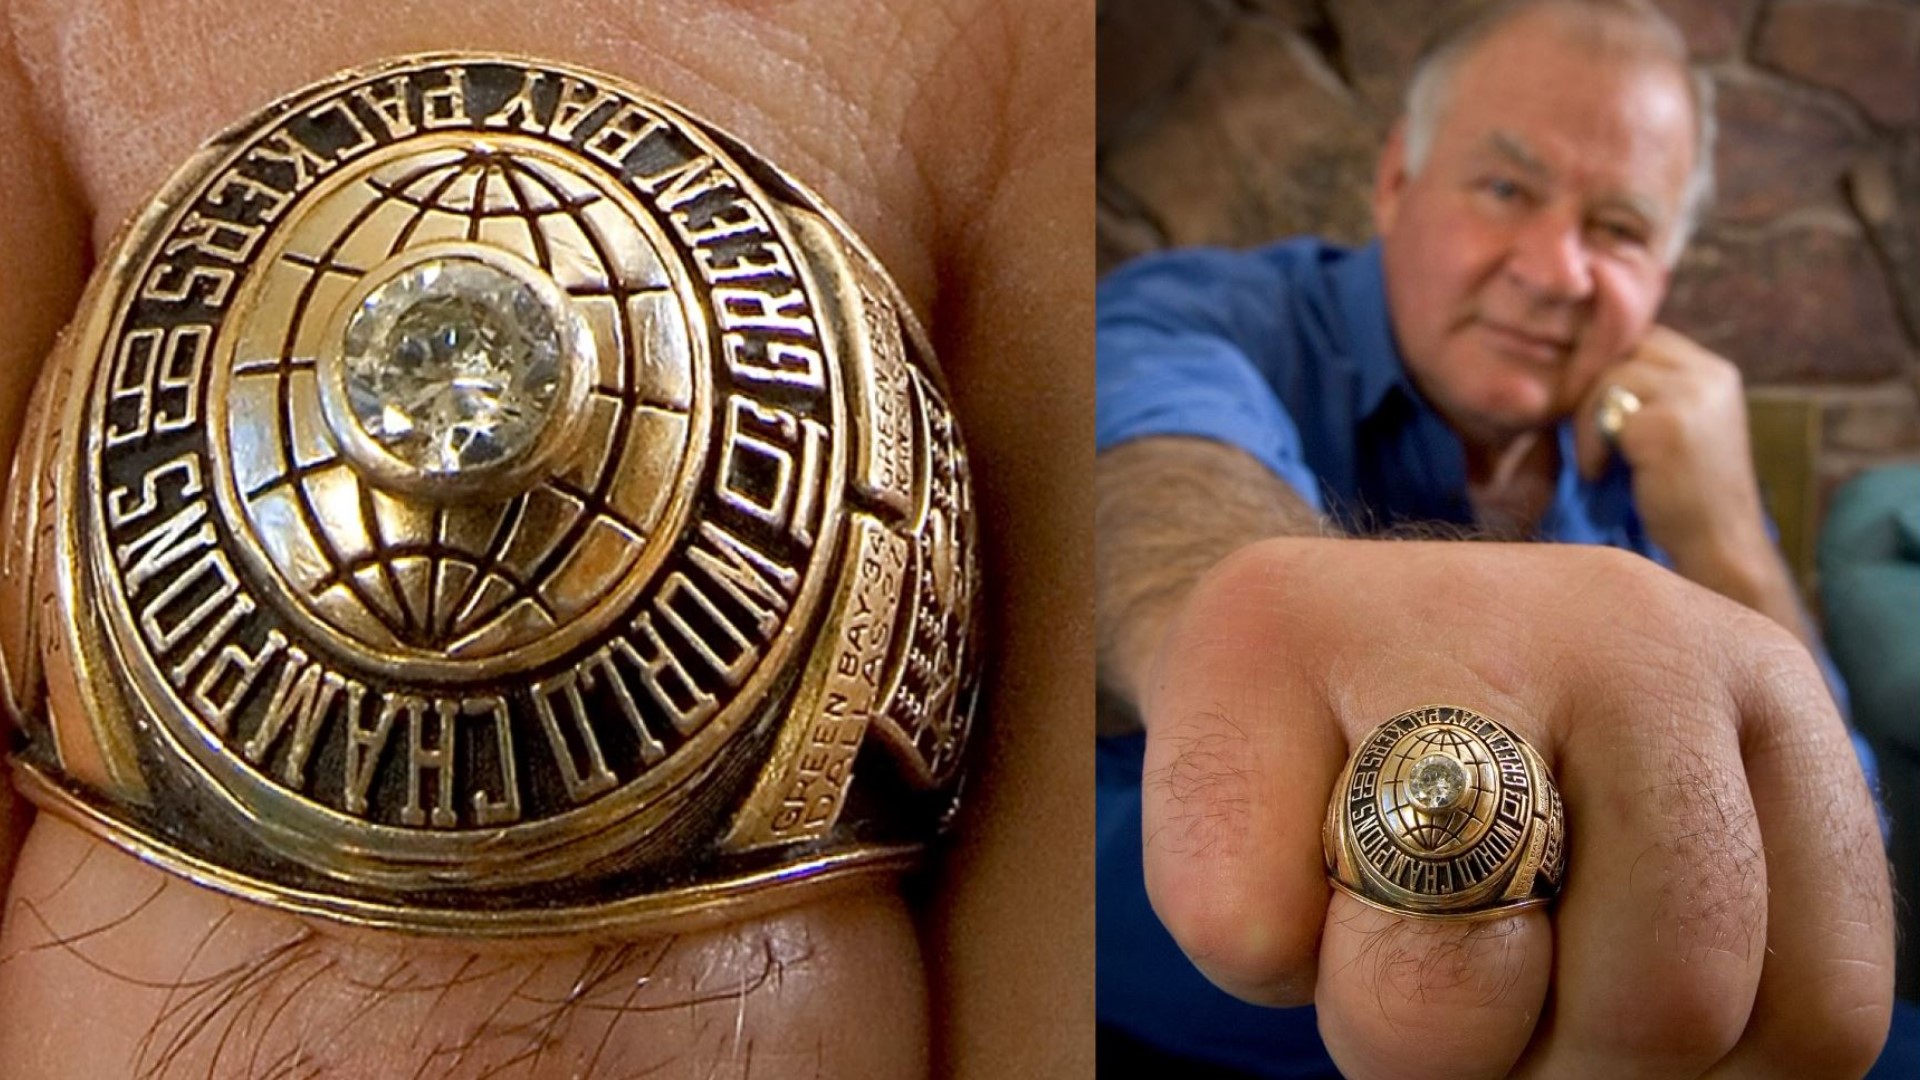 The story behind Jerry Kramer's lost Super Bowl ring 'It was quite